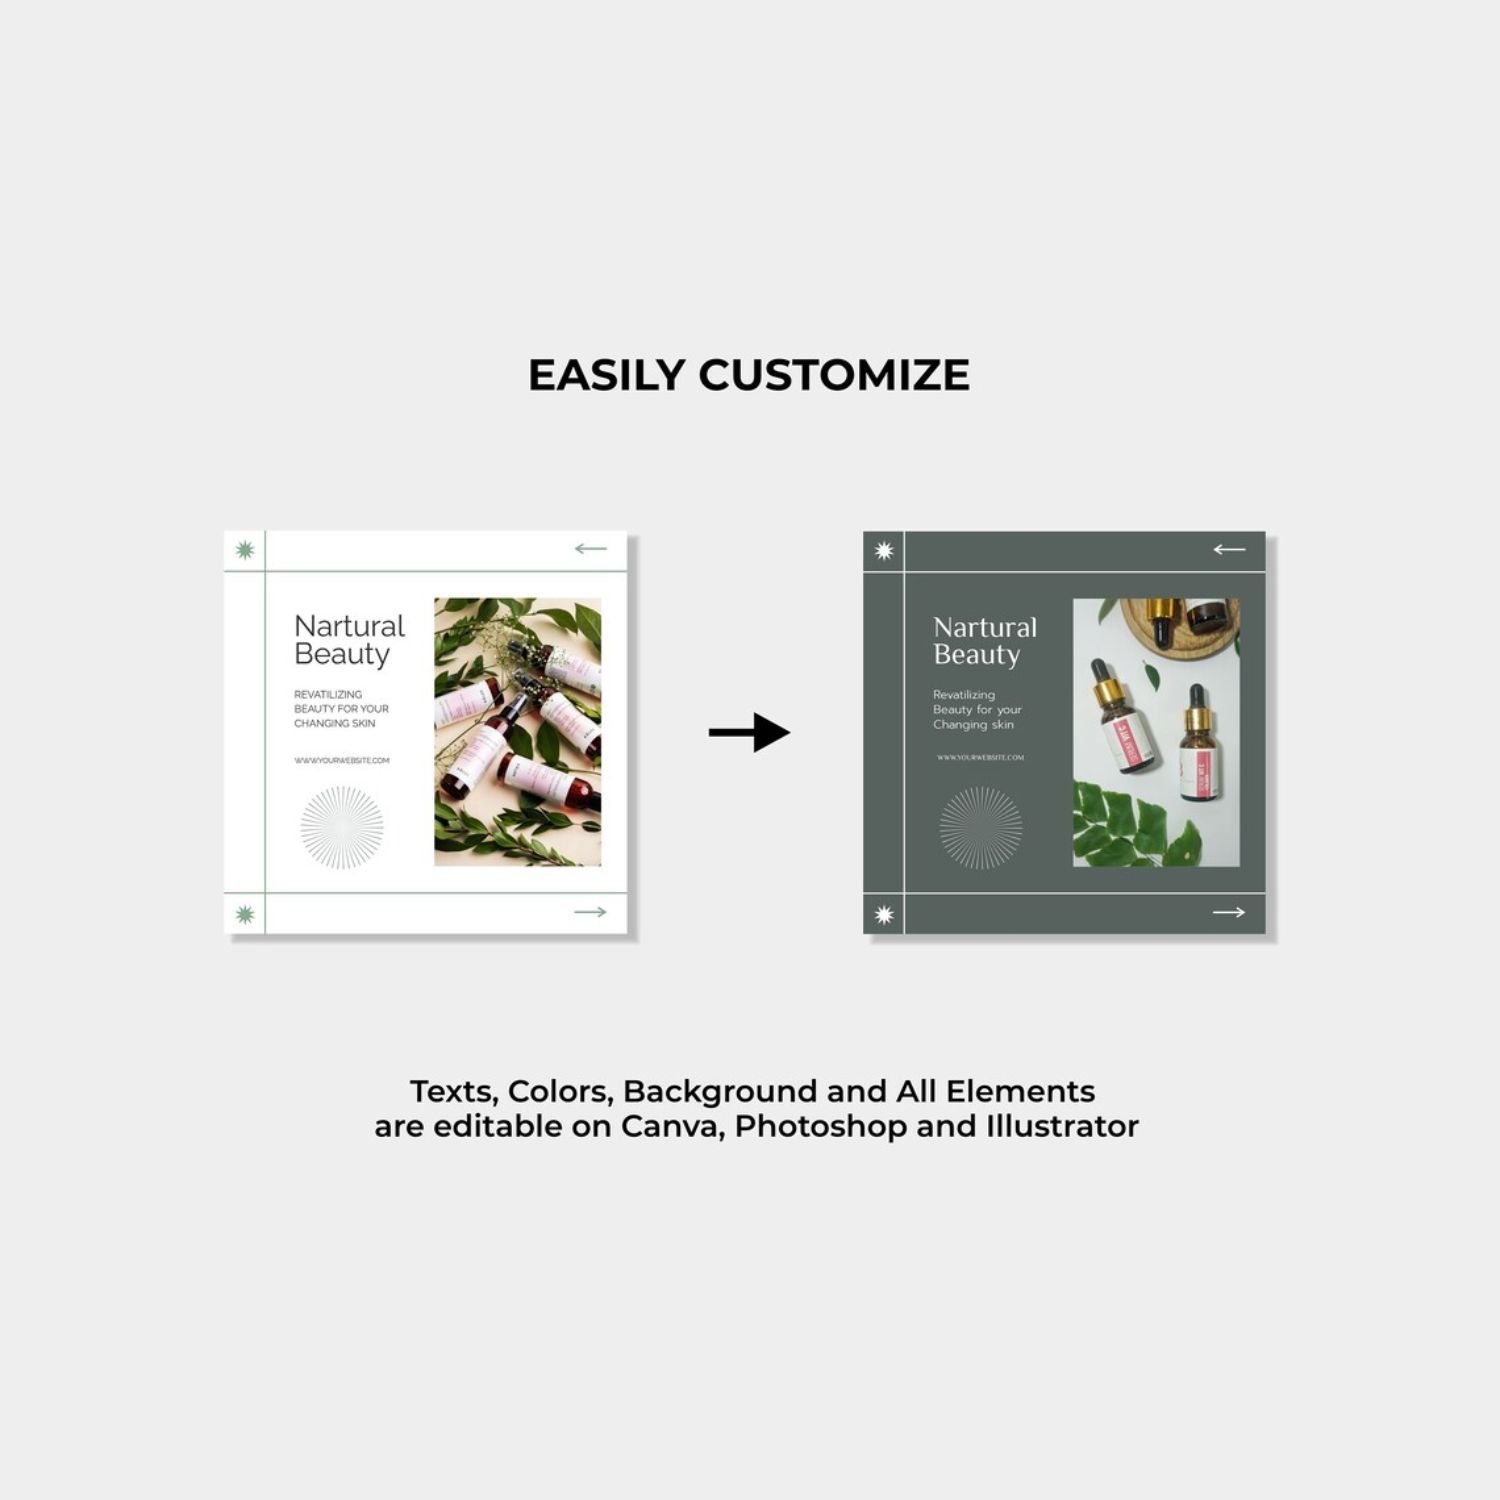 Natural Beauty And Skincare Instagram Marketing Templates Canva Photoshop Illustrator Before And After.